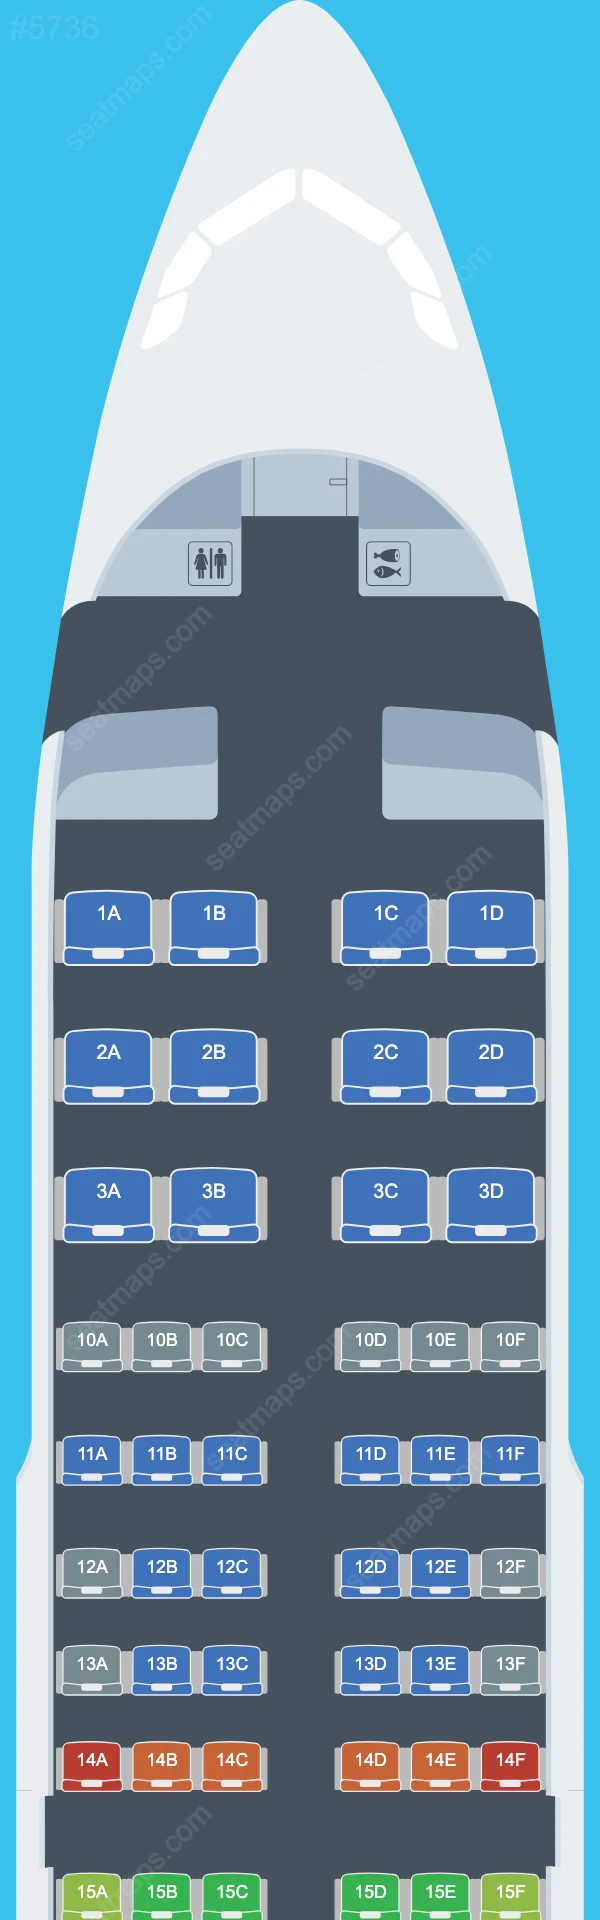 Delta Airbus A319 Seat Maps A319-100